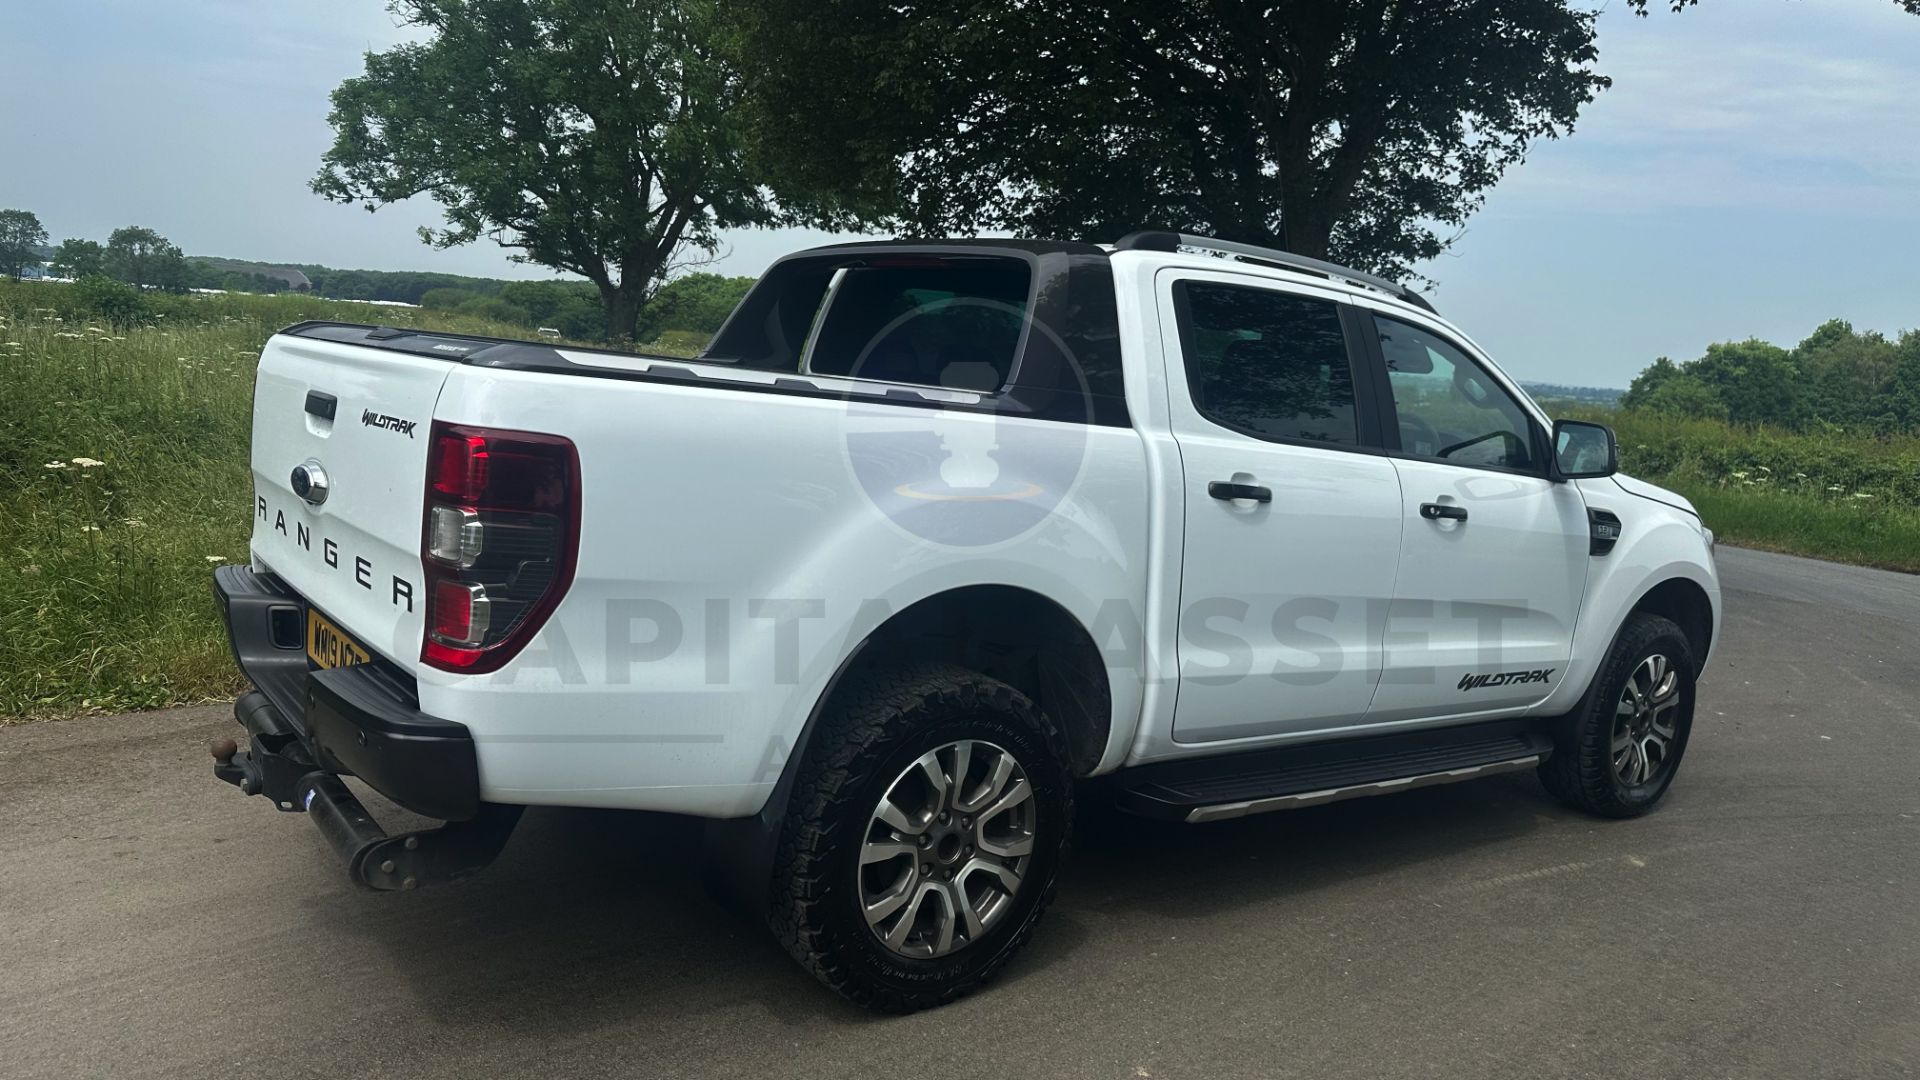 (ON SALE) FORD RANGER *WILDTRAK* DOUBLE CAB PICK-UP (2019 - EURO 6) 3.2 TDCI - AUTOMATIC (1 OWNER) - Image 13 of 50